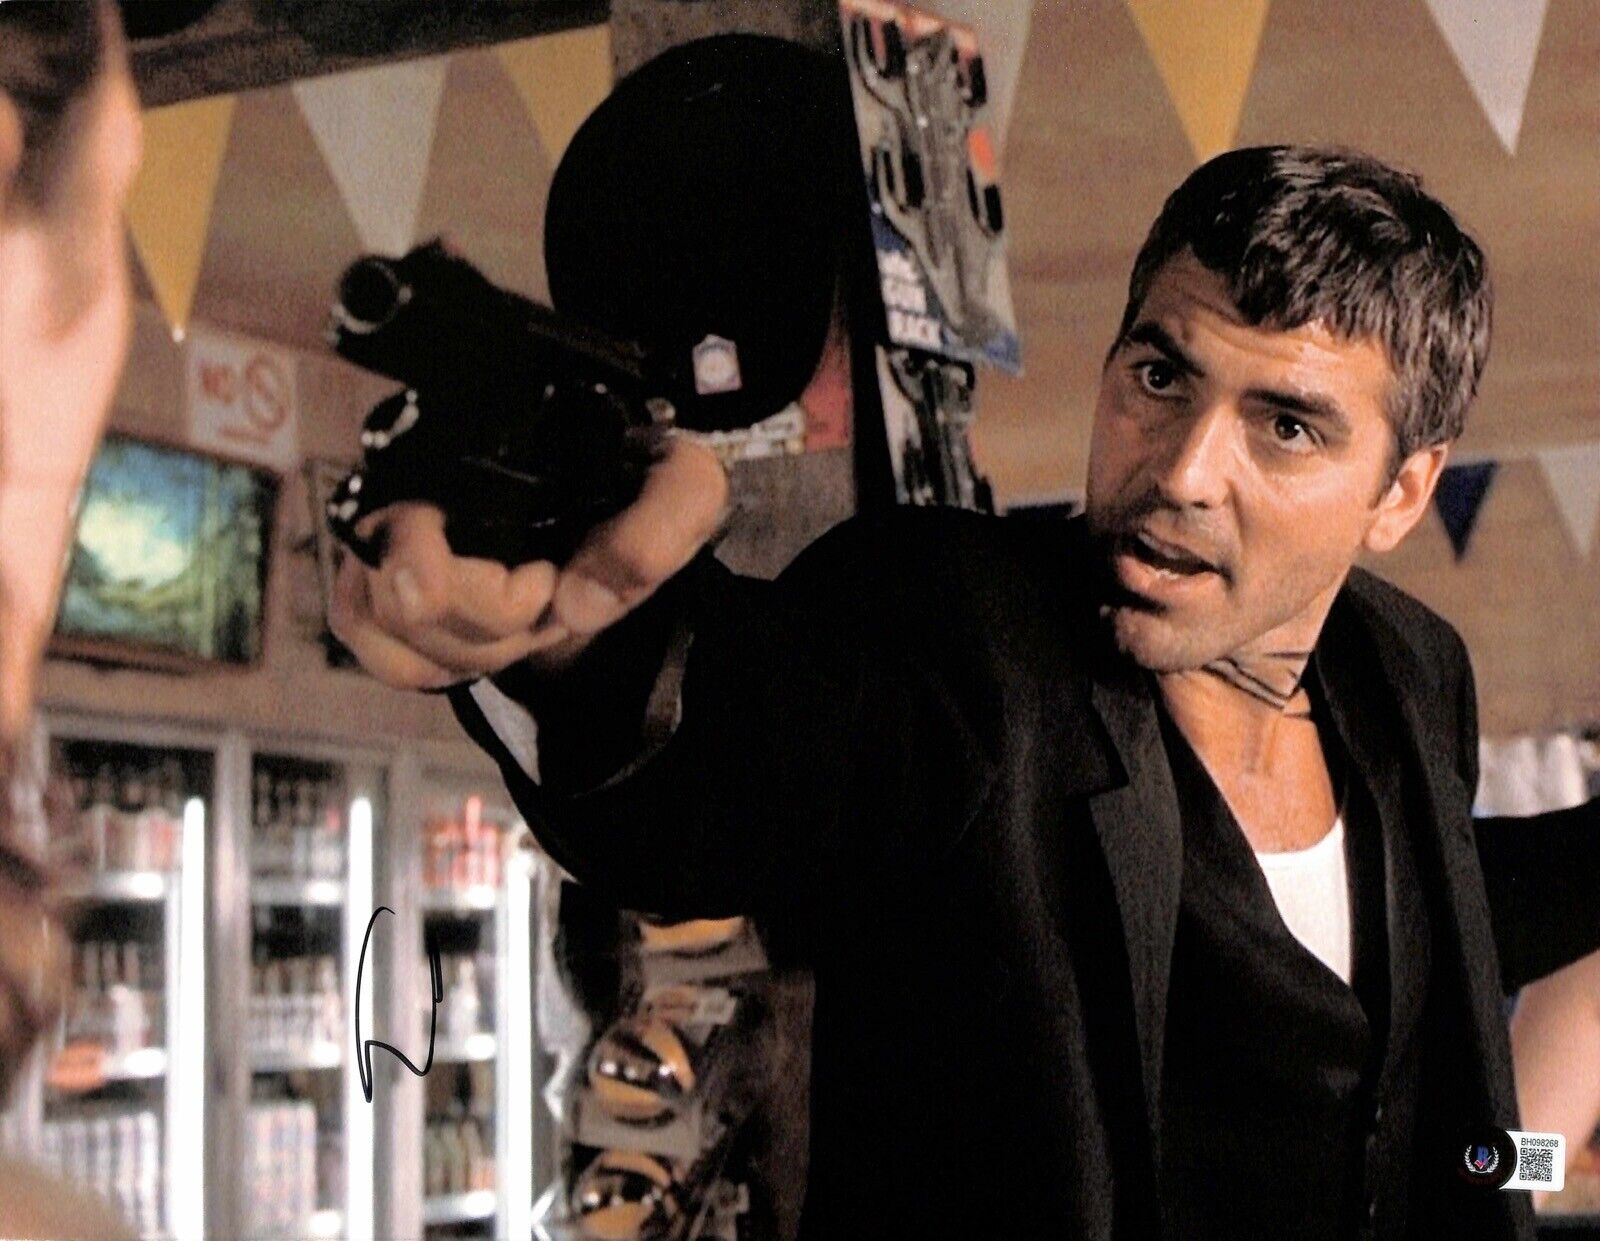 George Clooney From Dusk Till Dawn Signed 11x14 Photo BECKETT (Grad Collection)